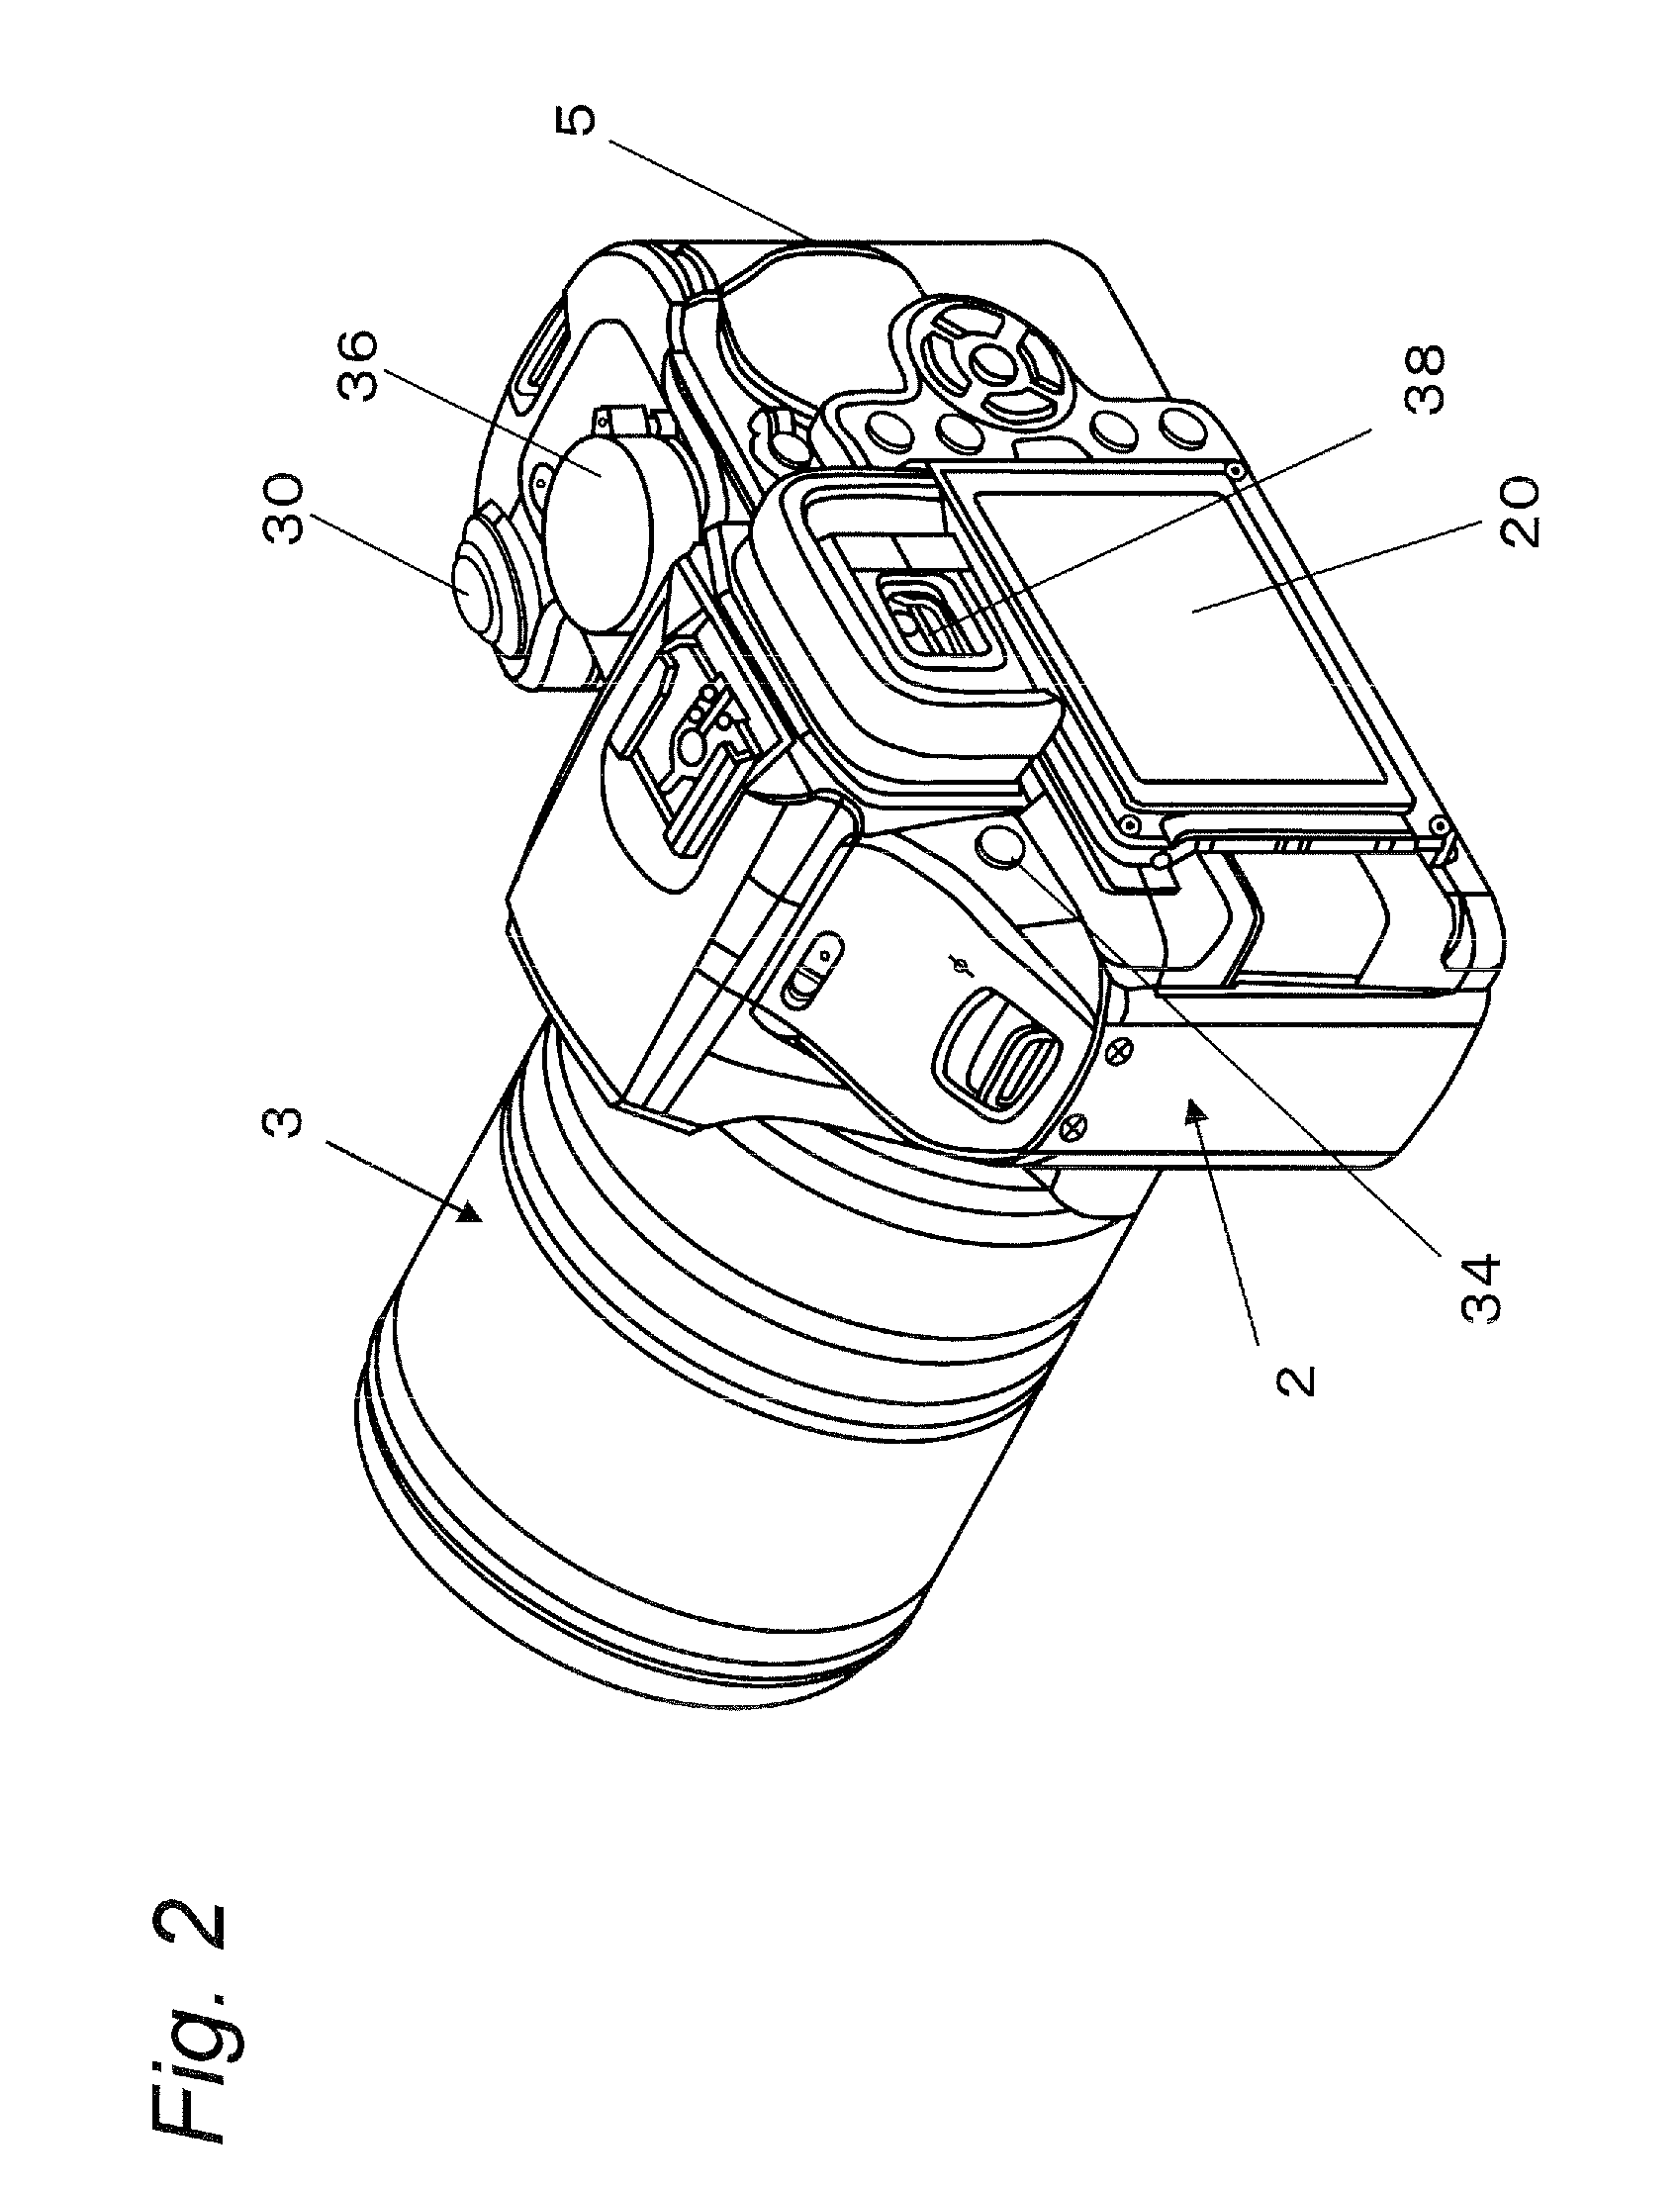 Zoom lens and imaging apparatus including focus cam for converting rotation amounts into focus lens group movement